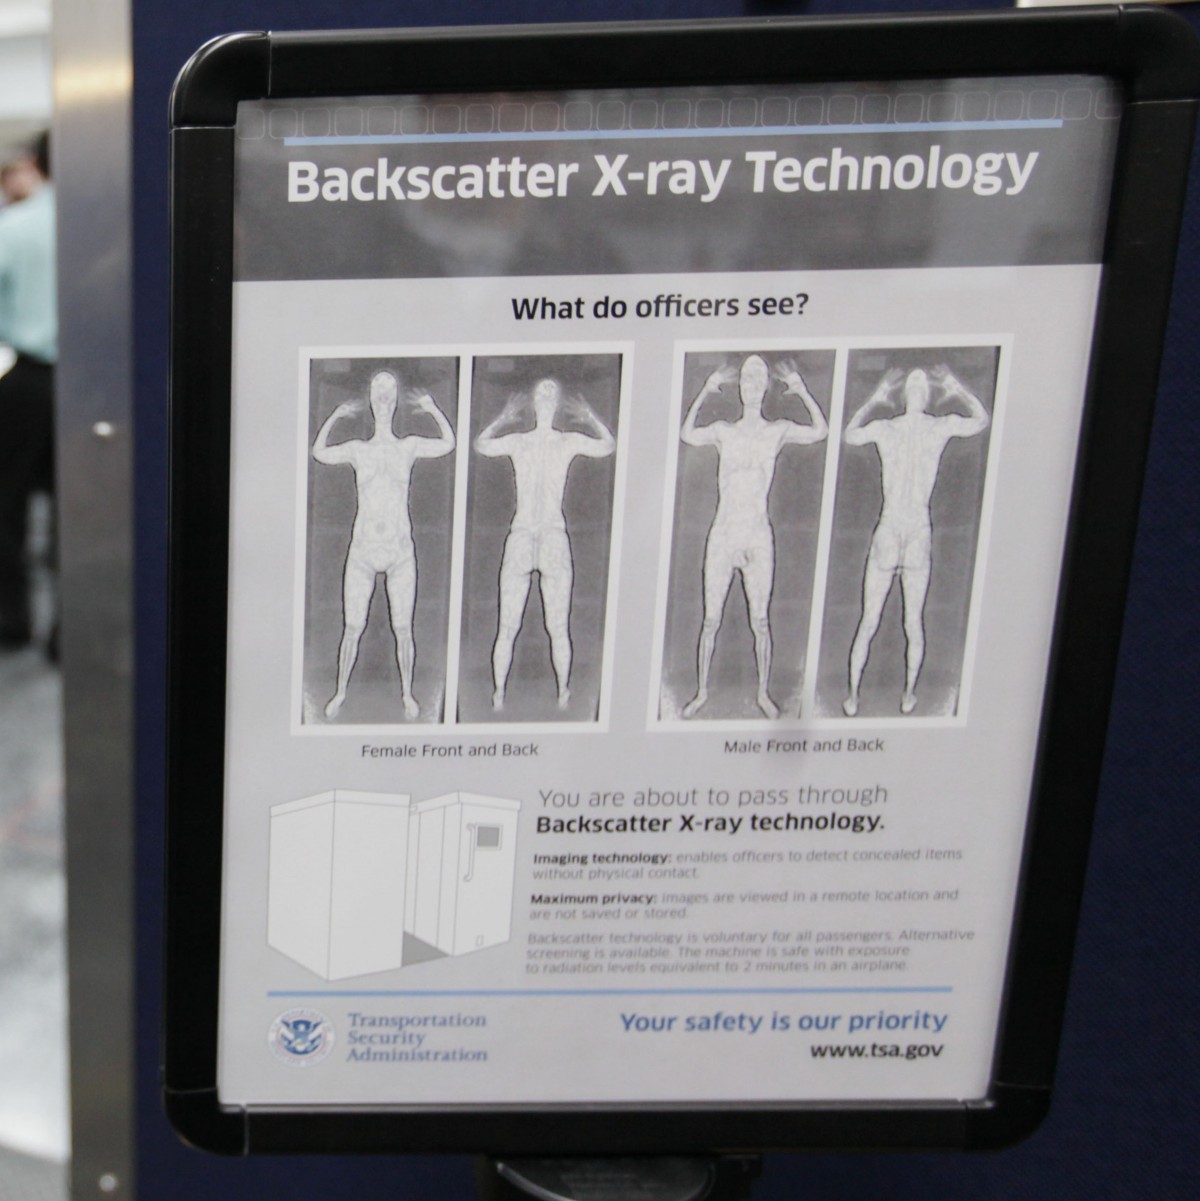 Full-body scanners: we reveal all